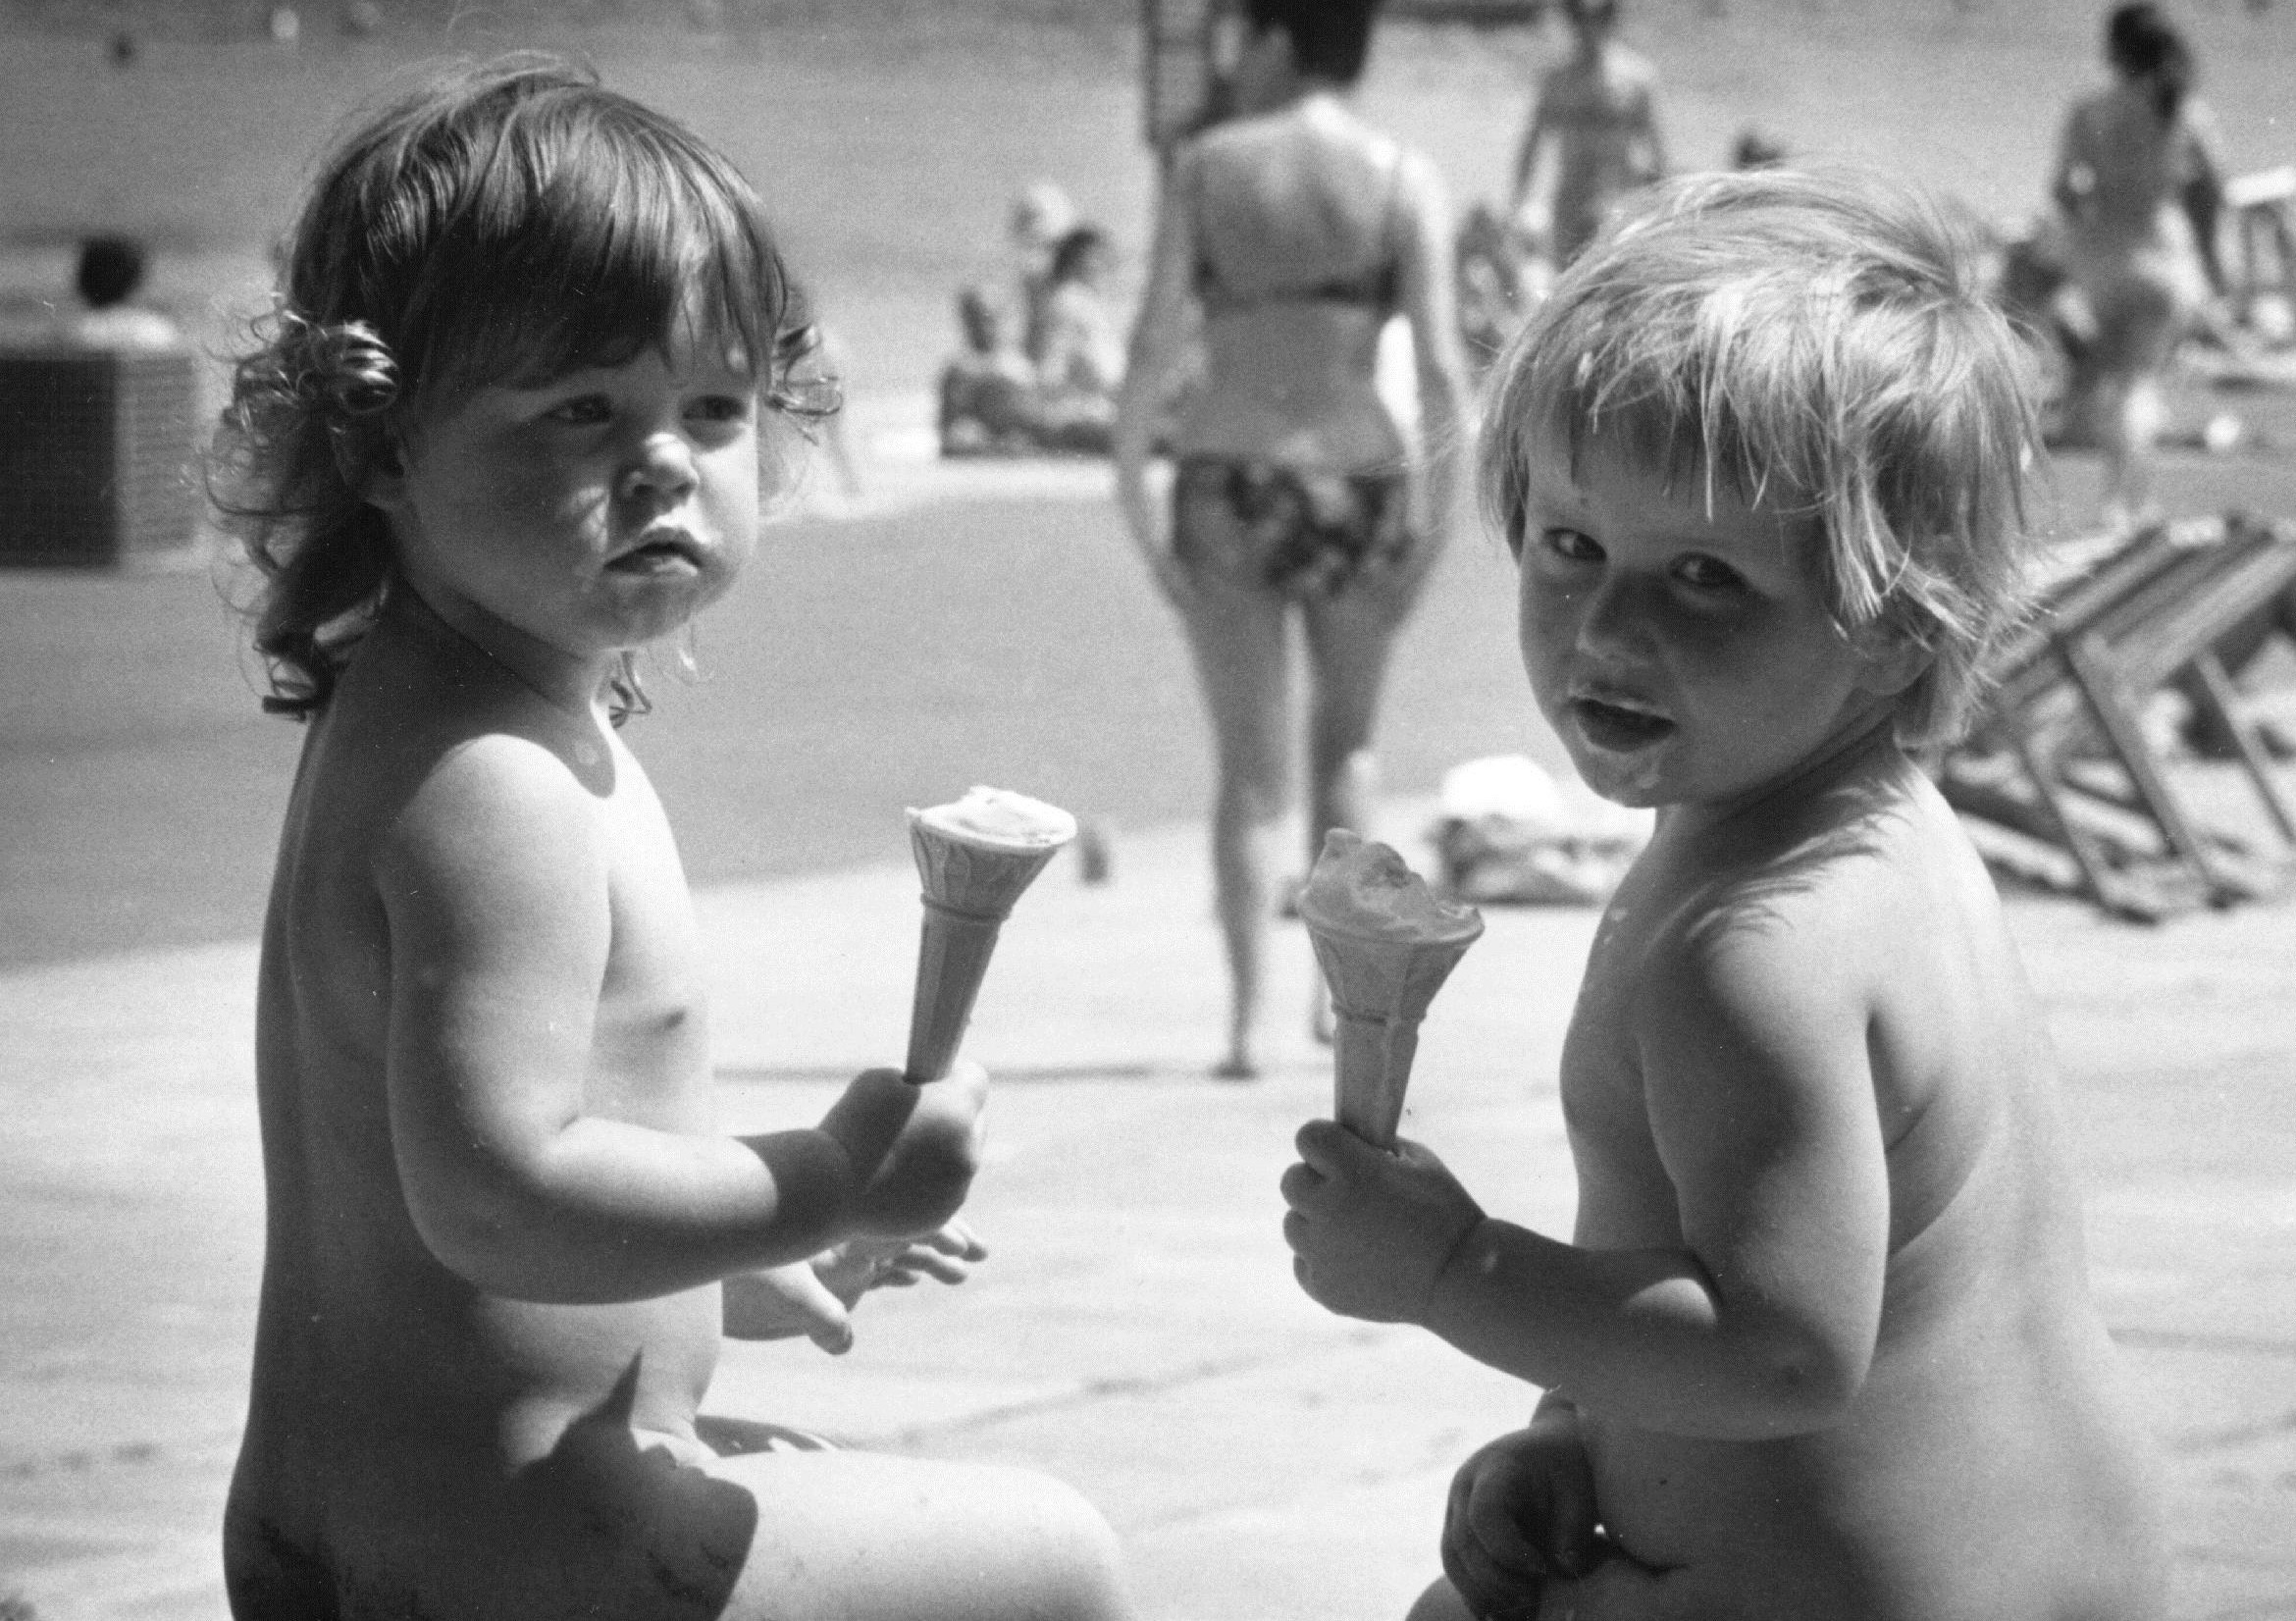 On the beach, 1976 (Evening Standard/Getty Images)